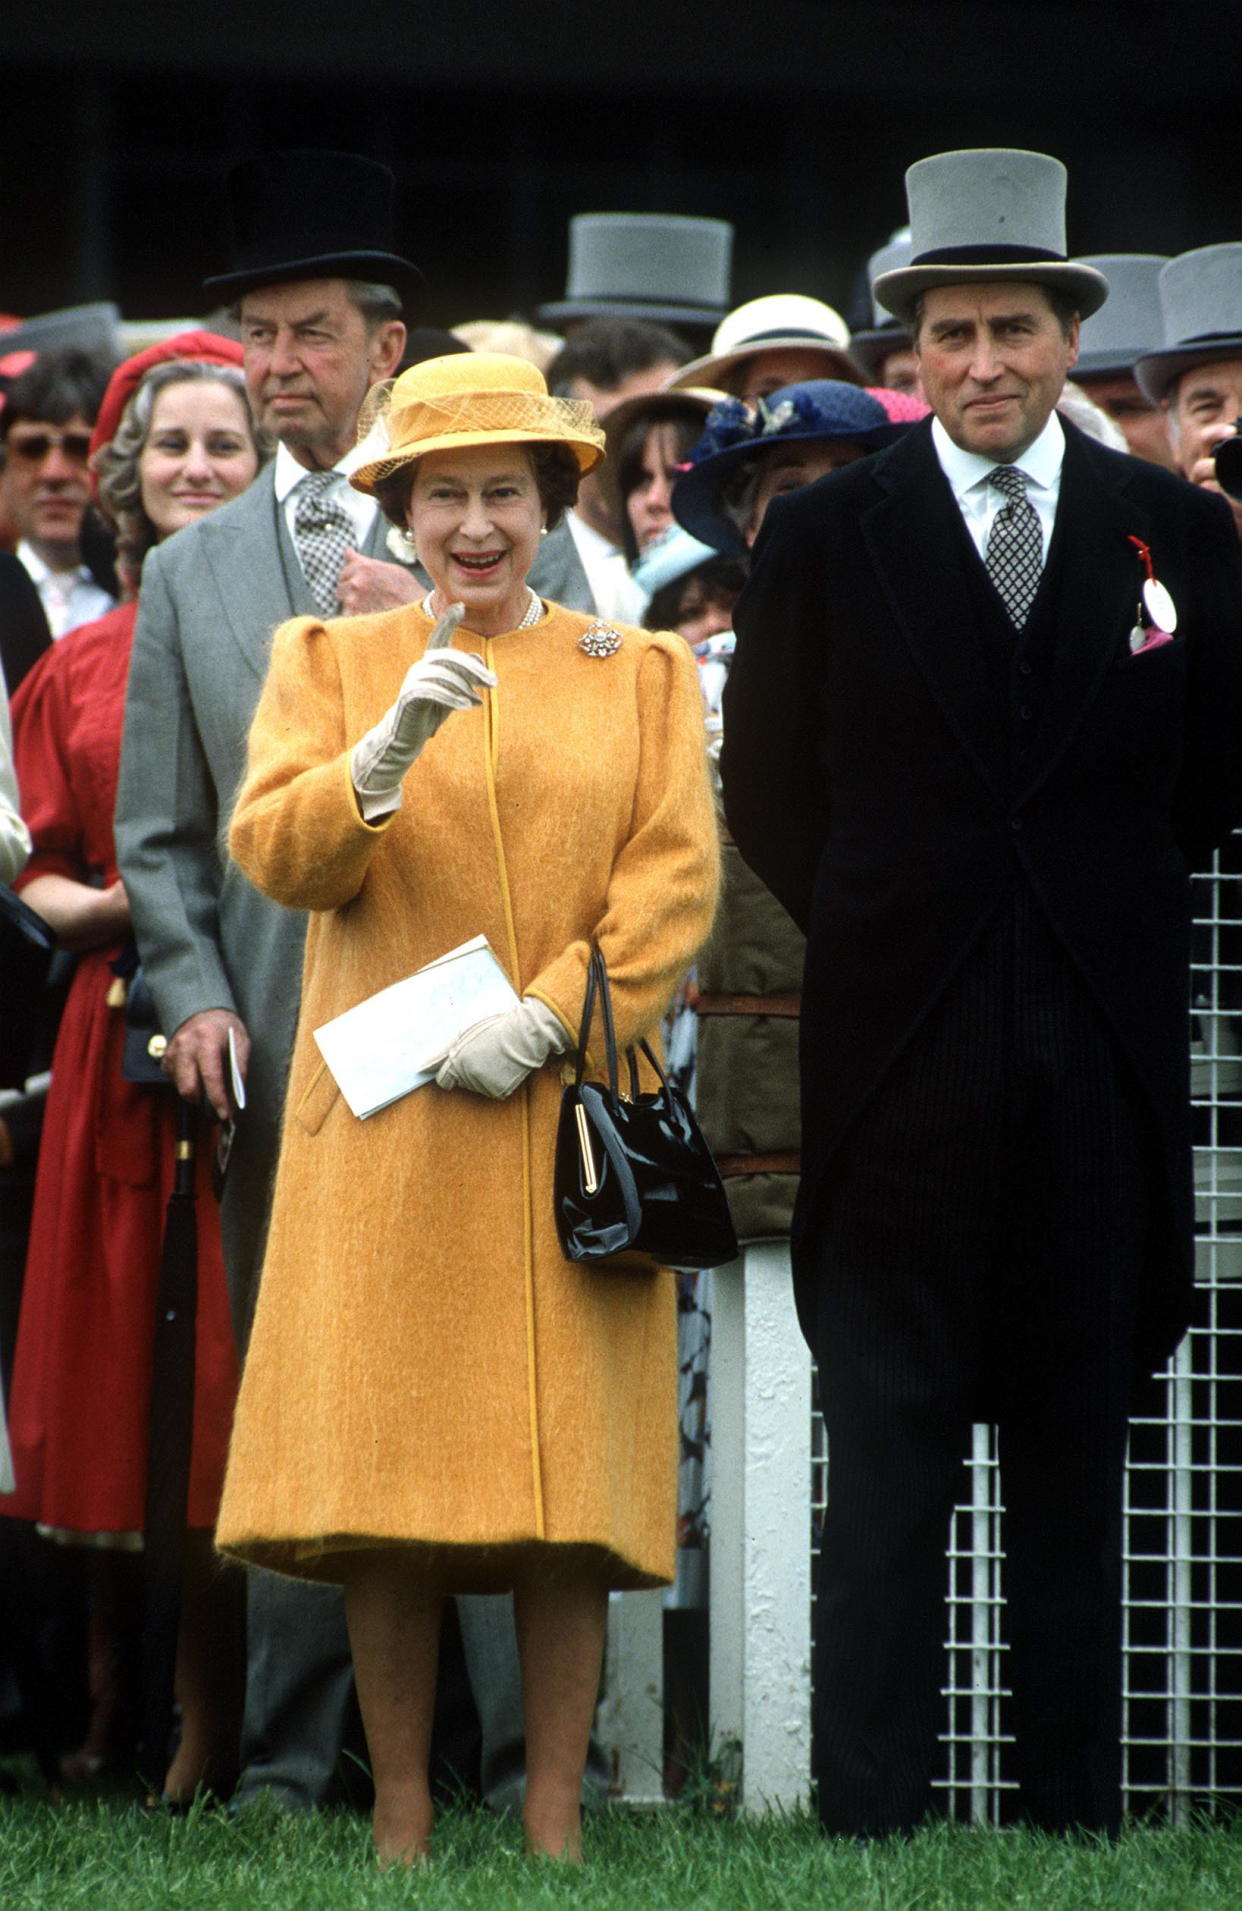 The monarch enjoyed a close friendship with Lord Porchester until his death in 2001 [Image: Getty]